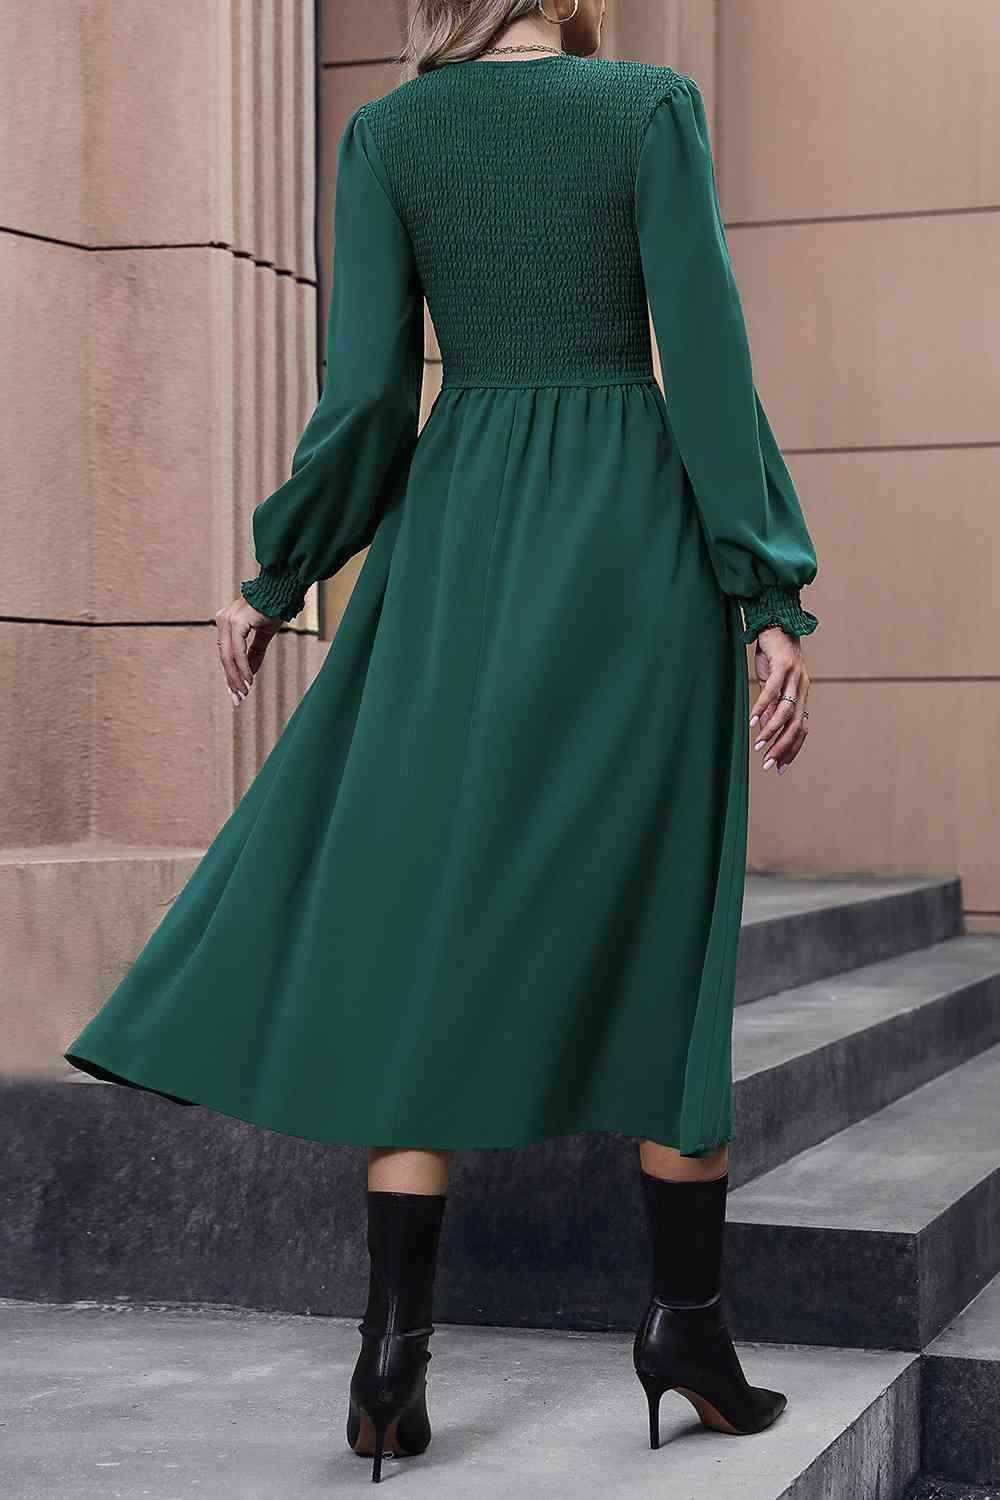 a woman wearing a green dress and black boots